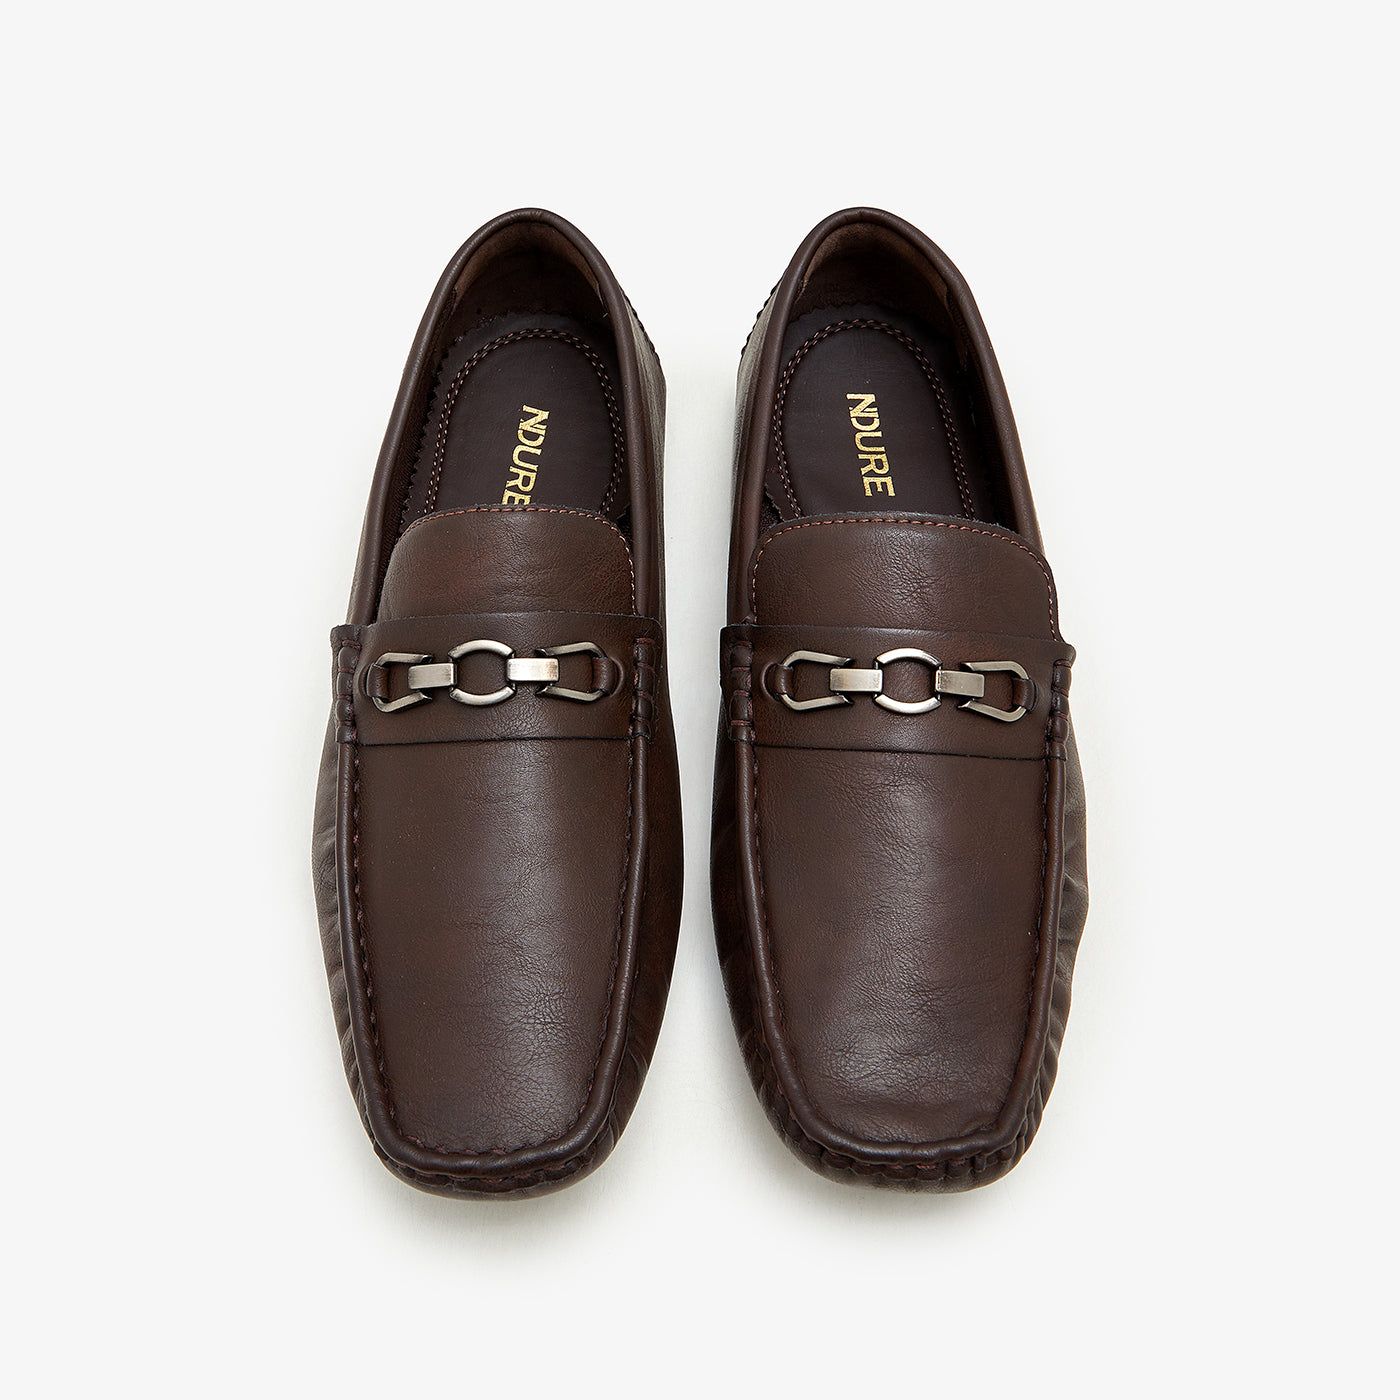 Men's Everyday Loafers